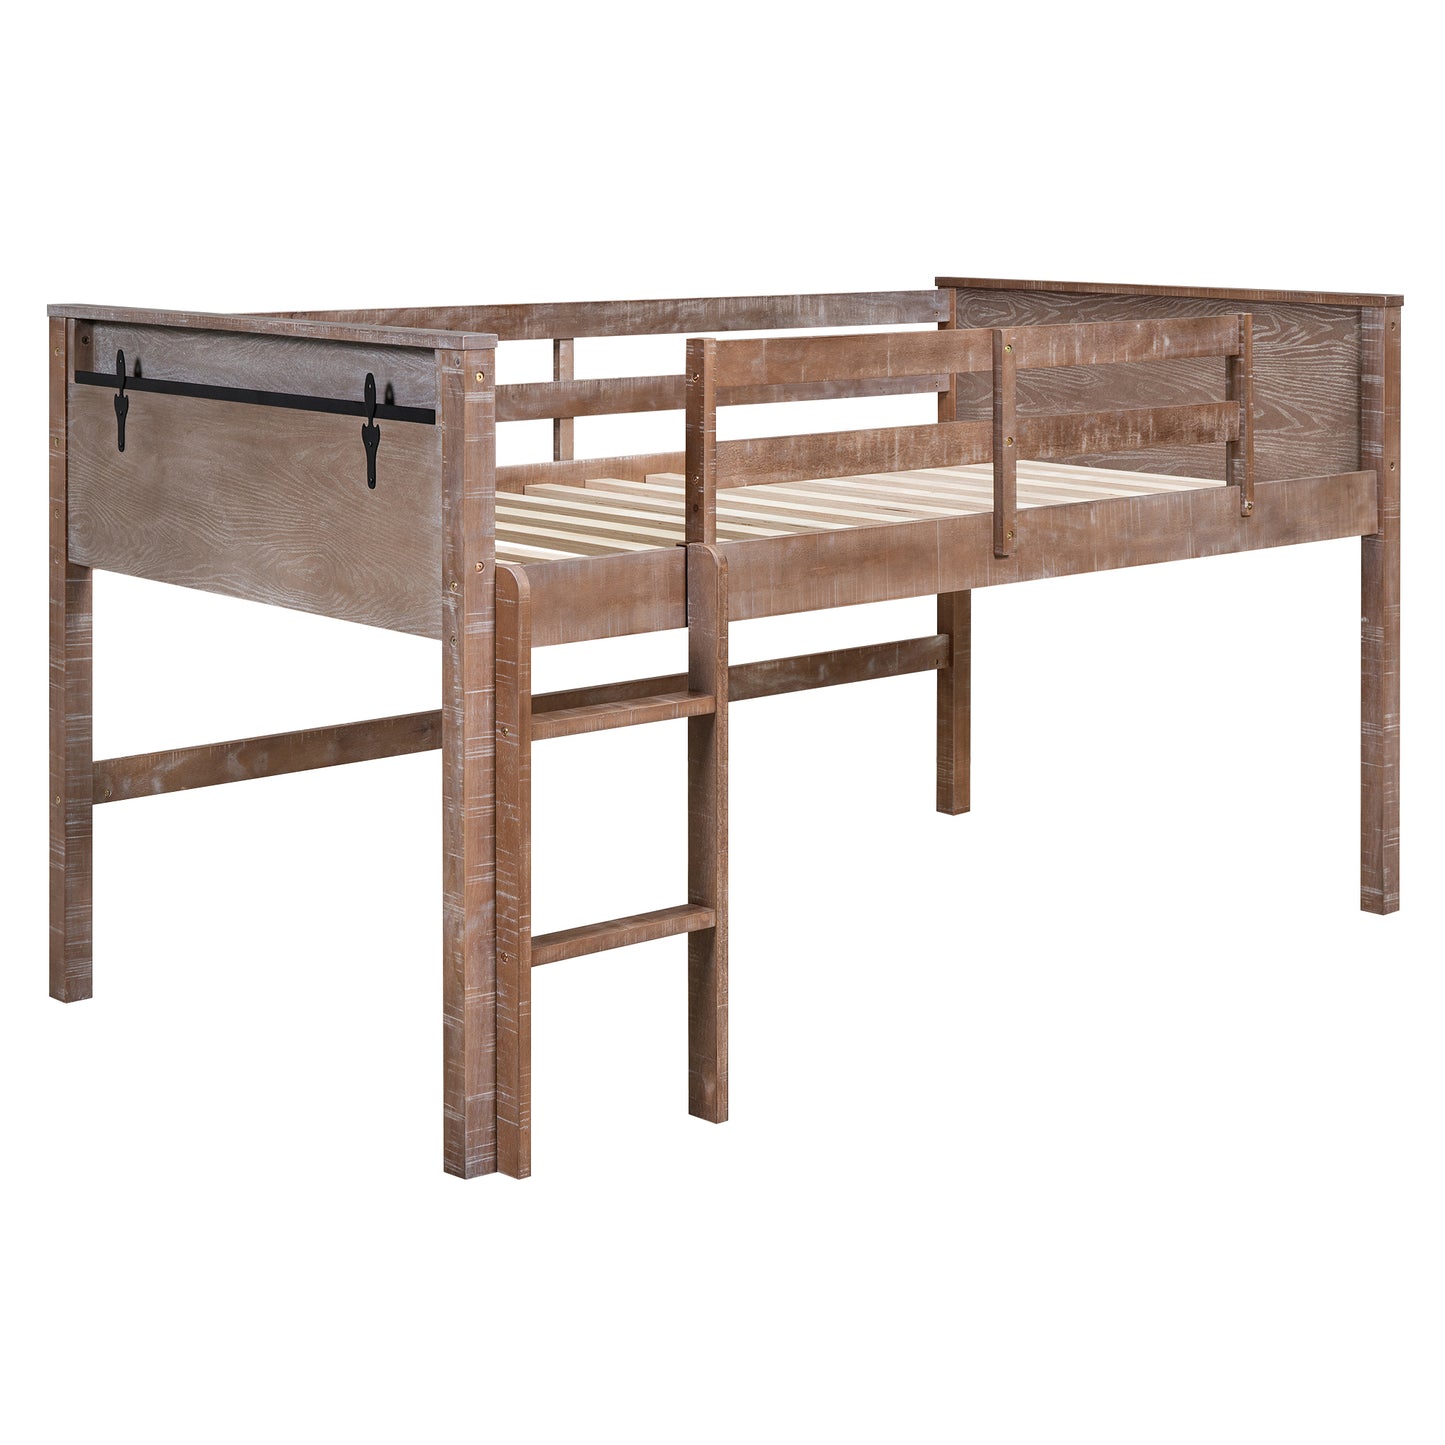 Wood Full Size Loft Bed with Hanging Clothes Racks, White Rustic Natural